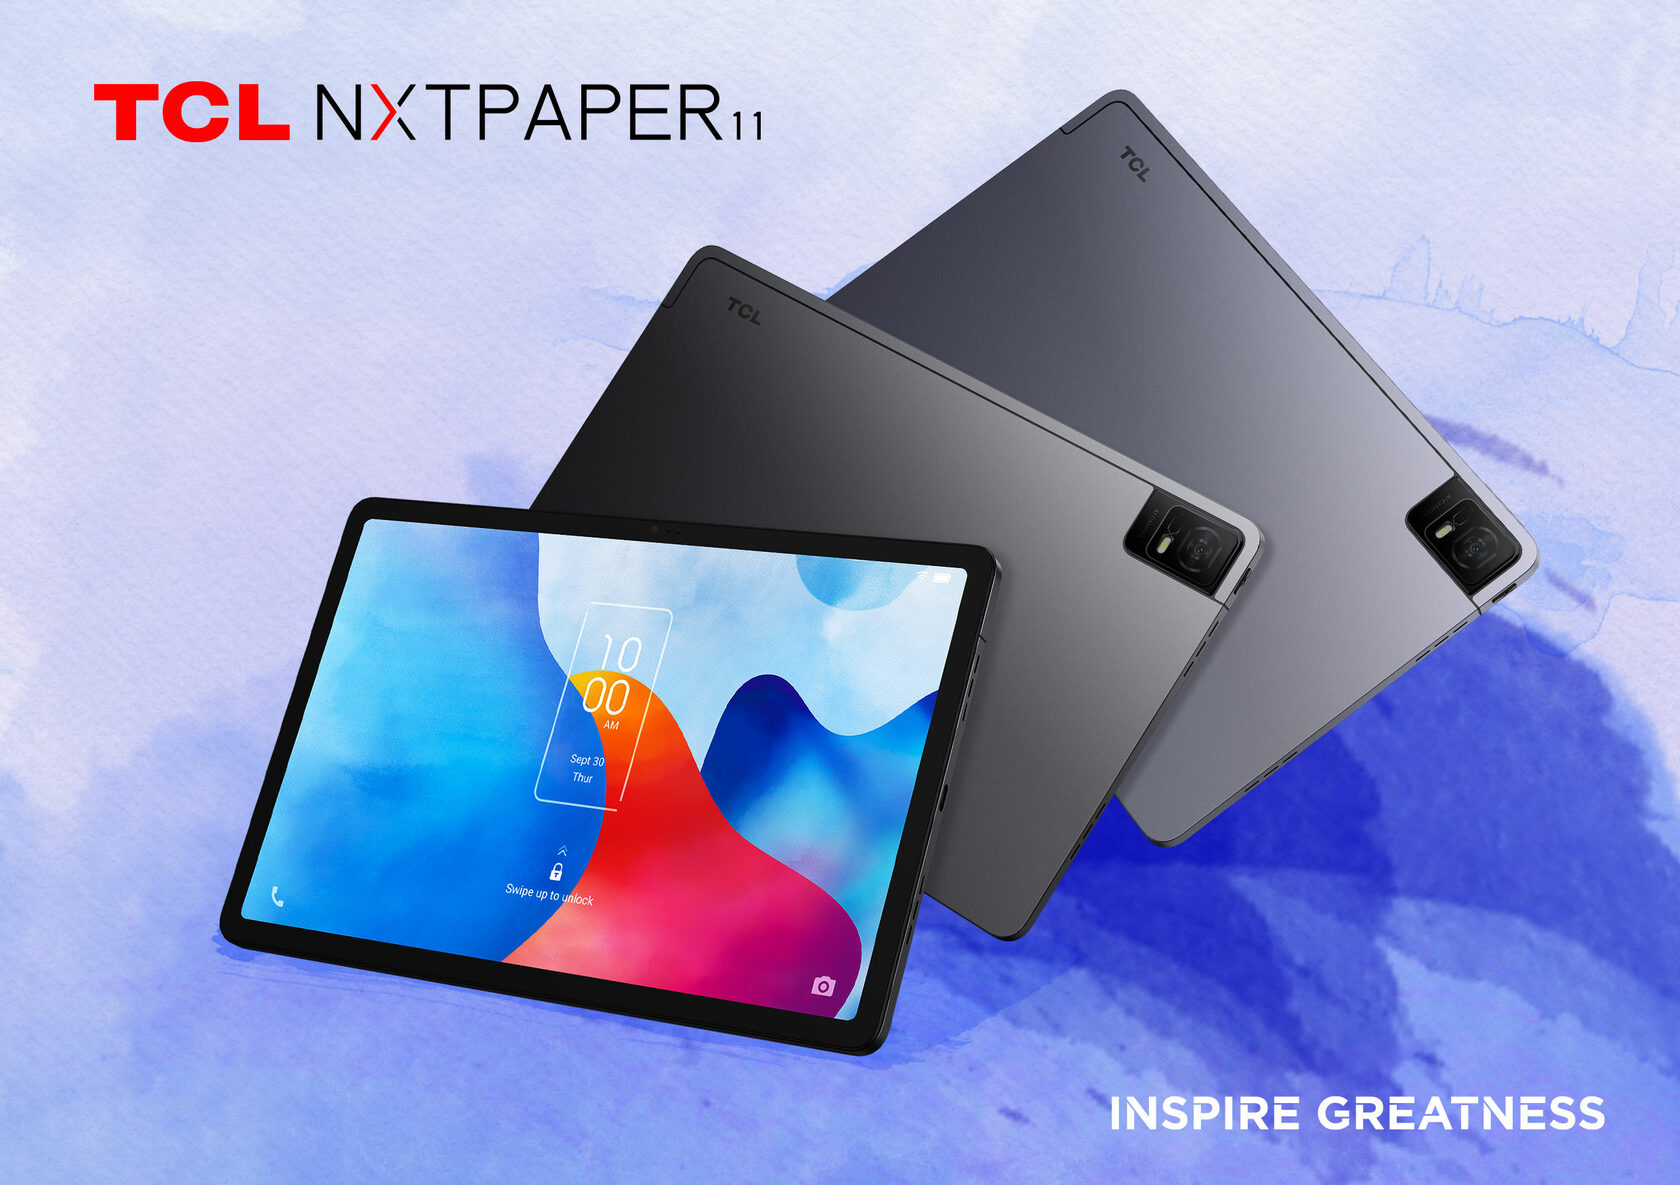 TCL NXTPAPER 11 - Specifications